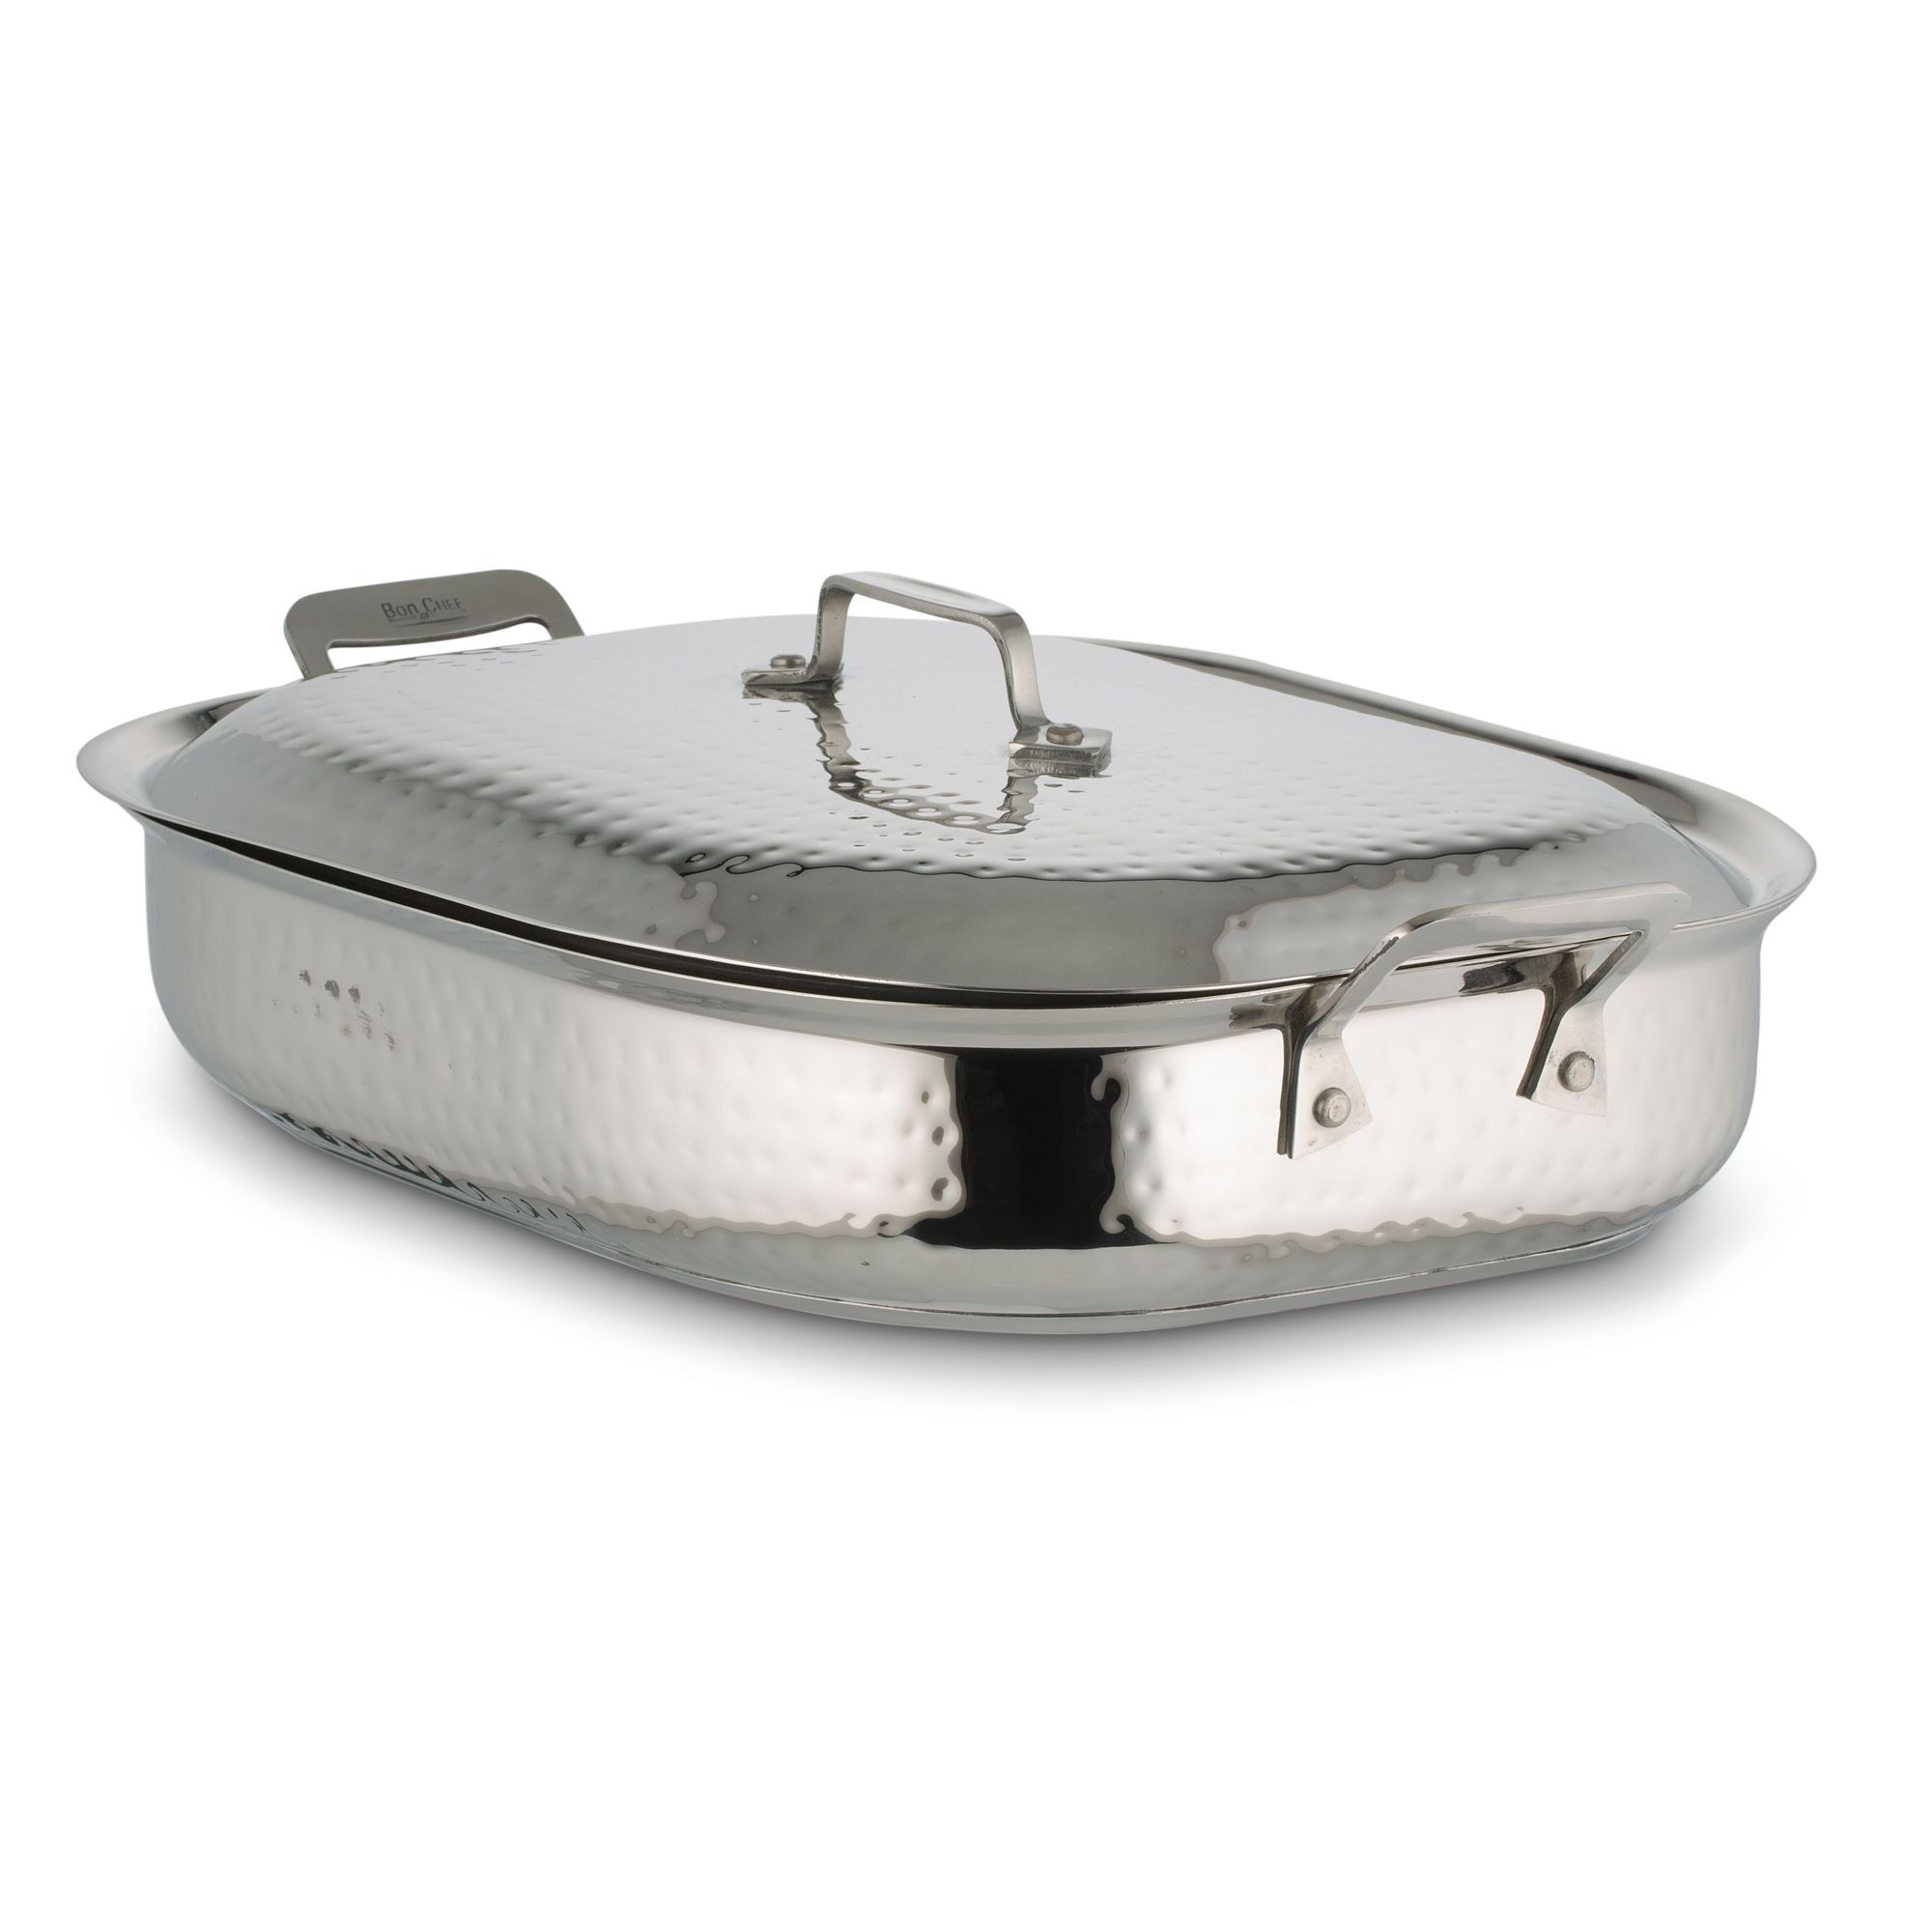 Bon Chef 60023CLDHF Cucina Stainless Steel Oblong Pan with Lid, Hammered Finish, 5 Qt.